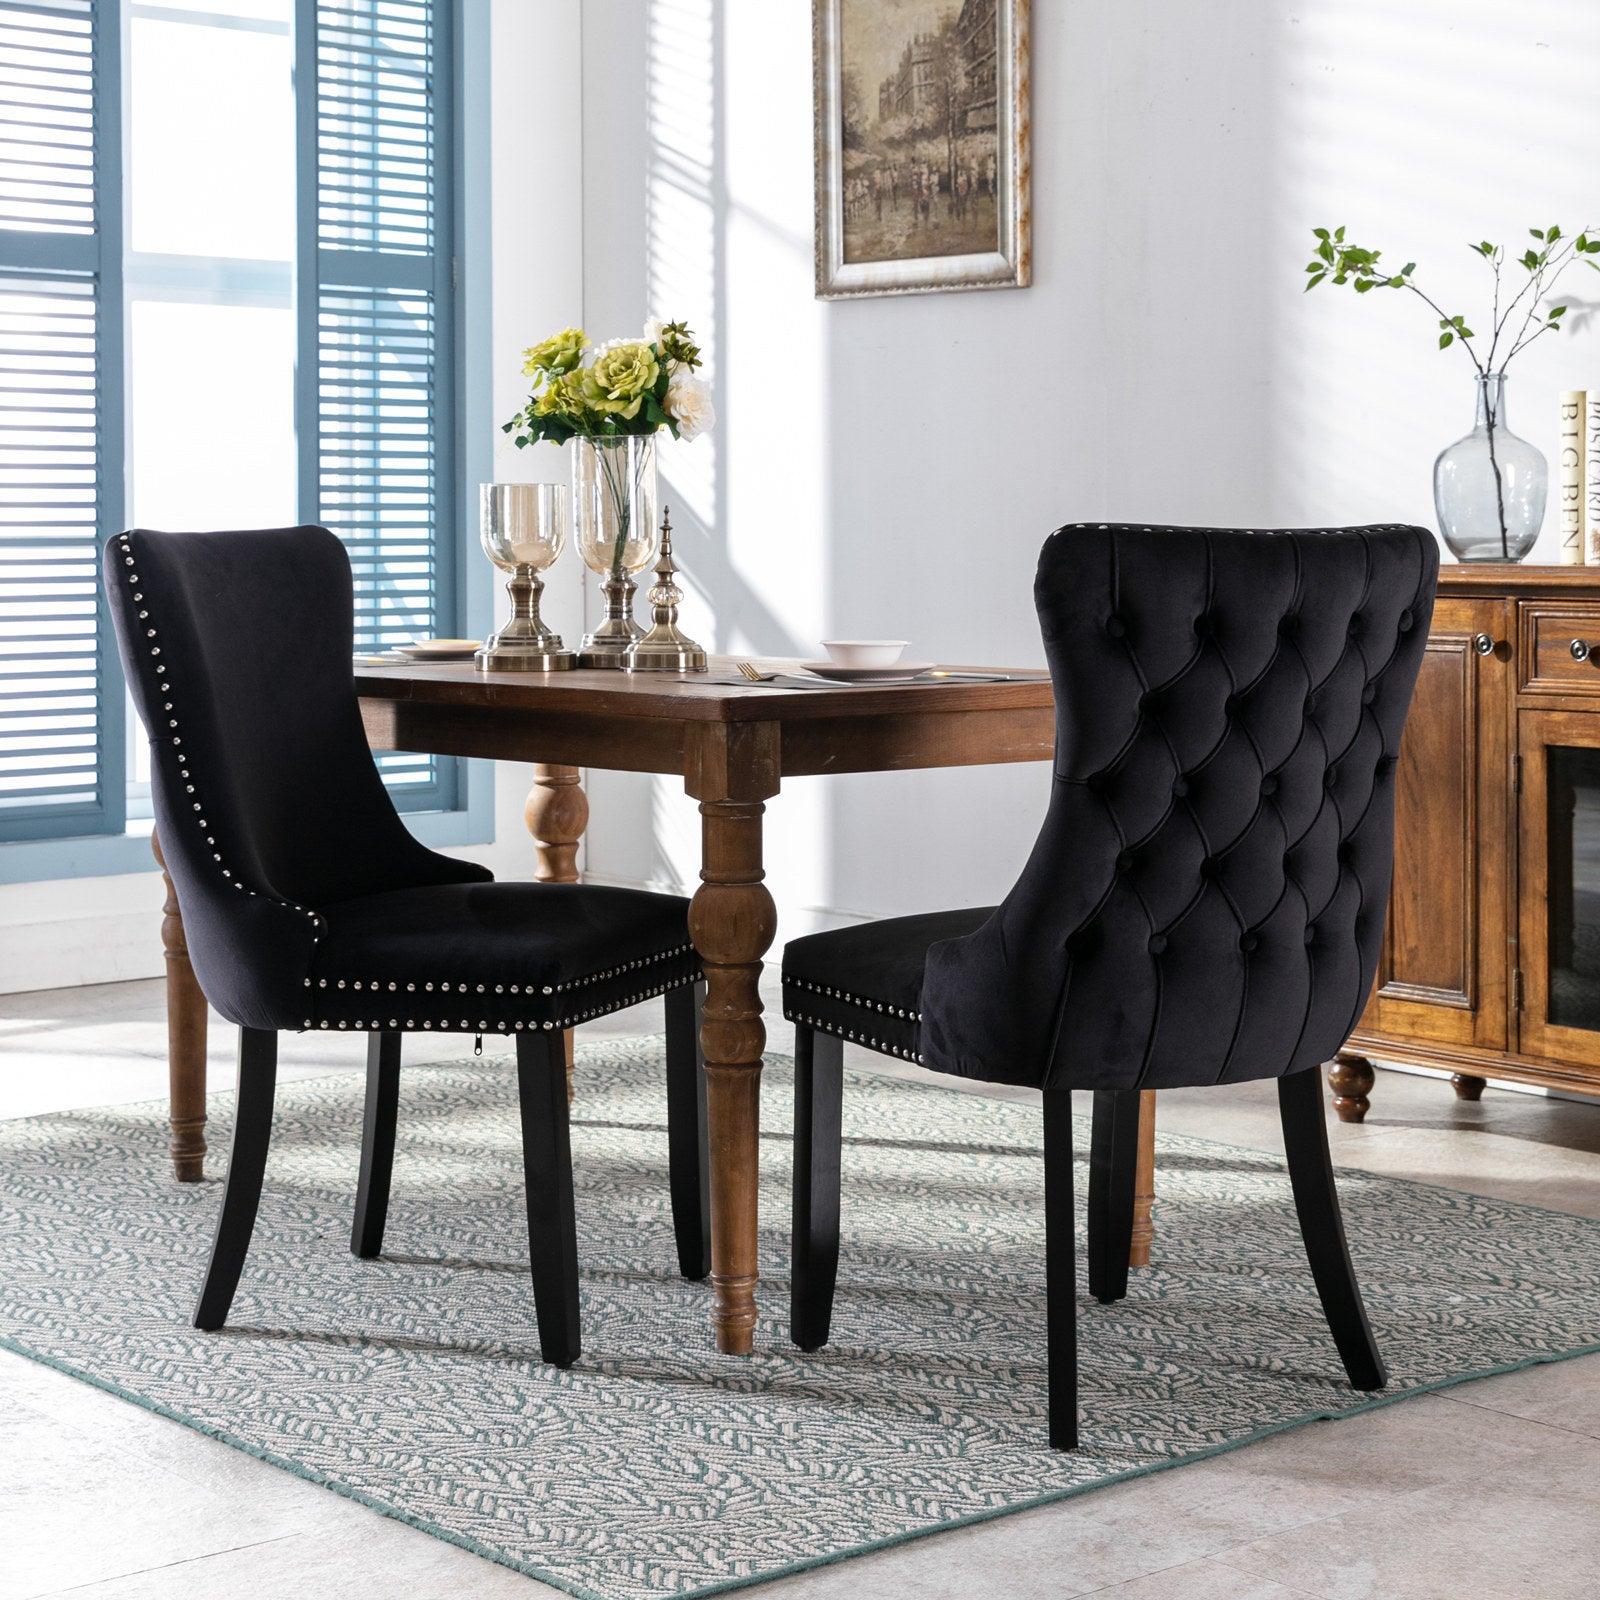 🆓🚛 Upholstered Wing-Back Dining Chair With Backstitching Nailhead Trim & Solid Wood Legs, Set Of 2, Black